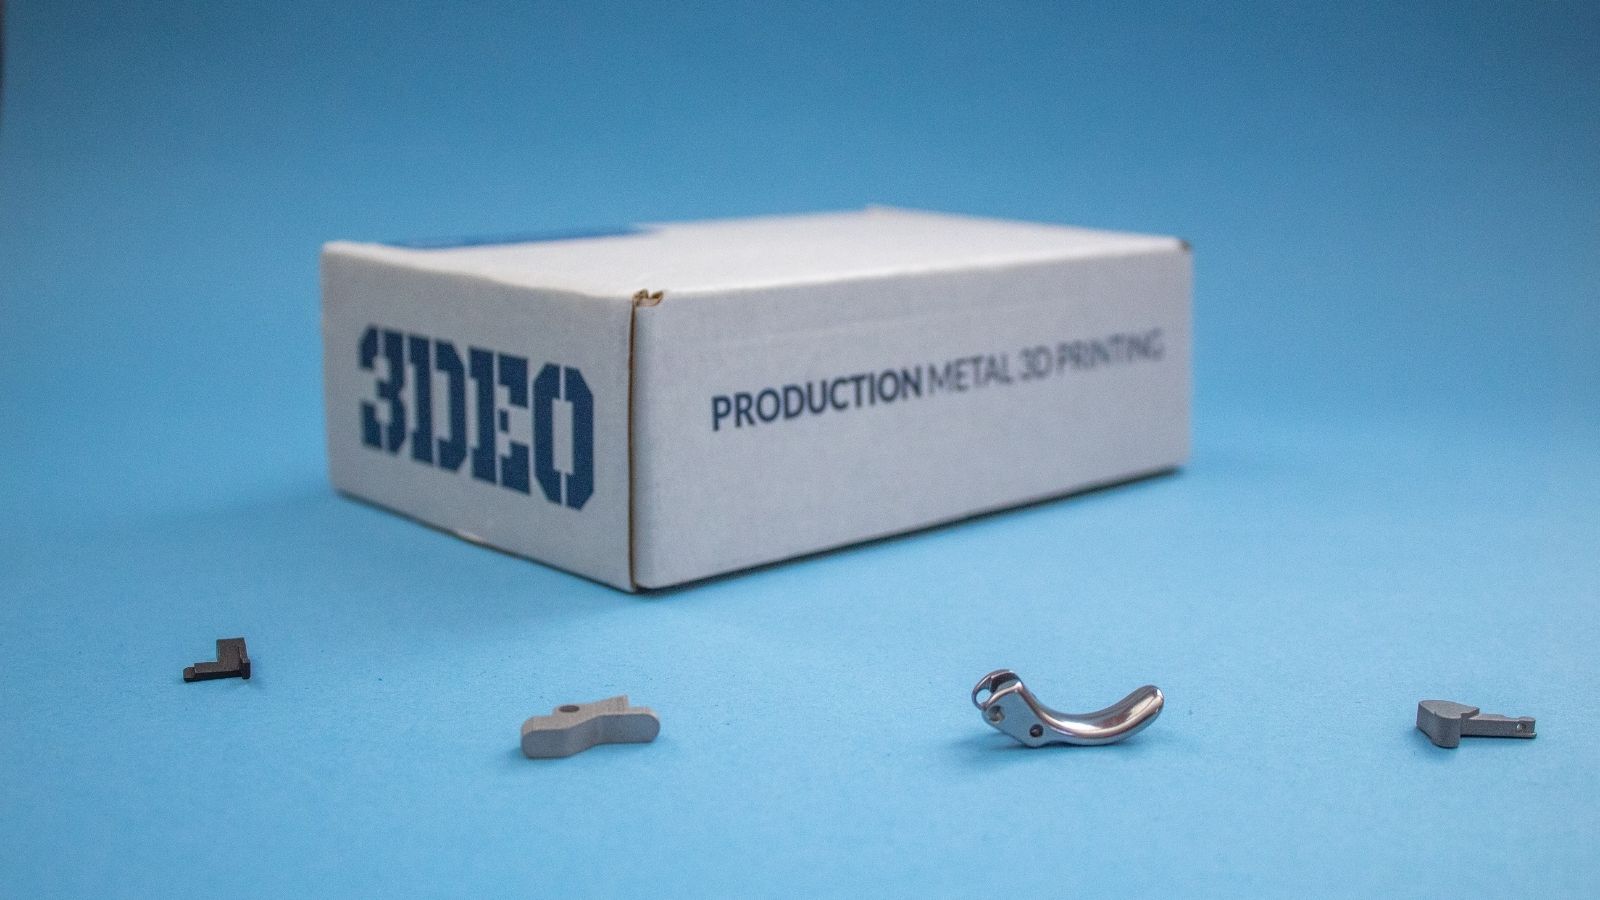 See and feel the future of metal 3D printing with our award-winning sample kit